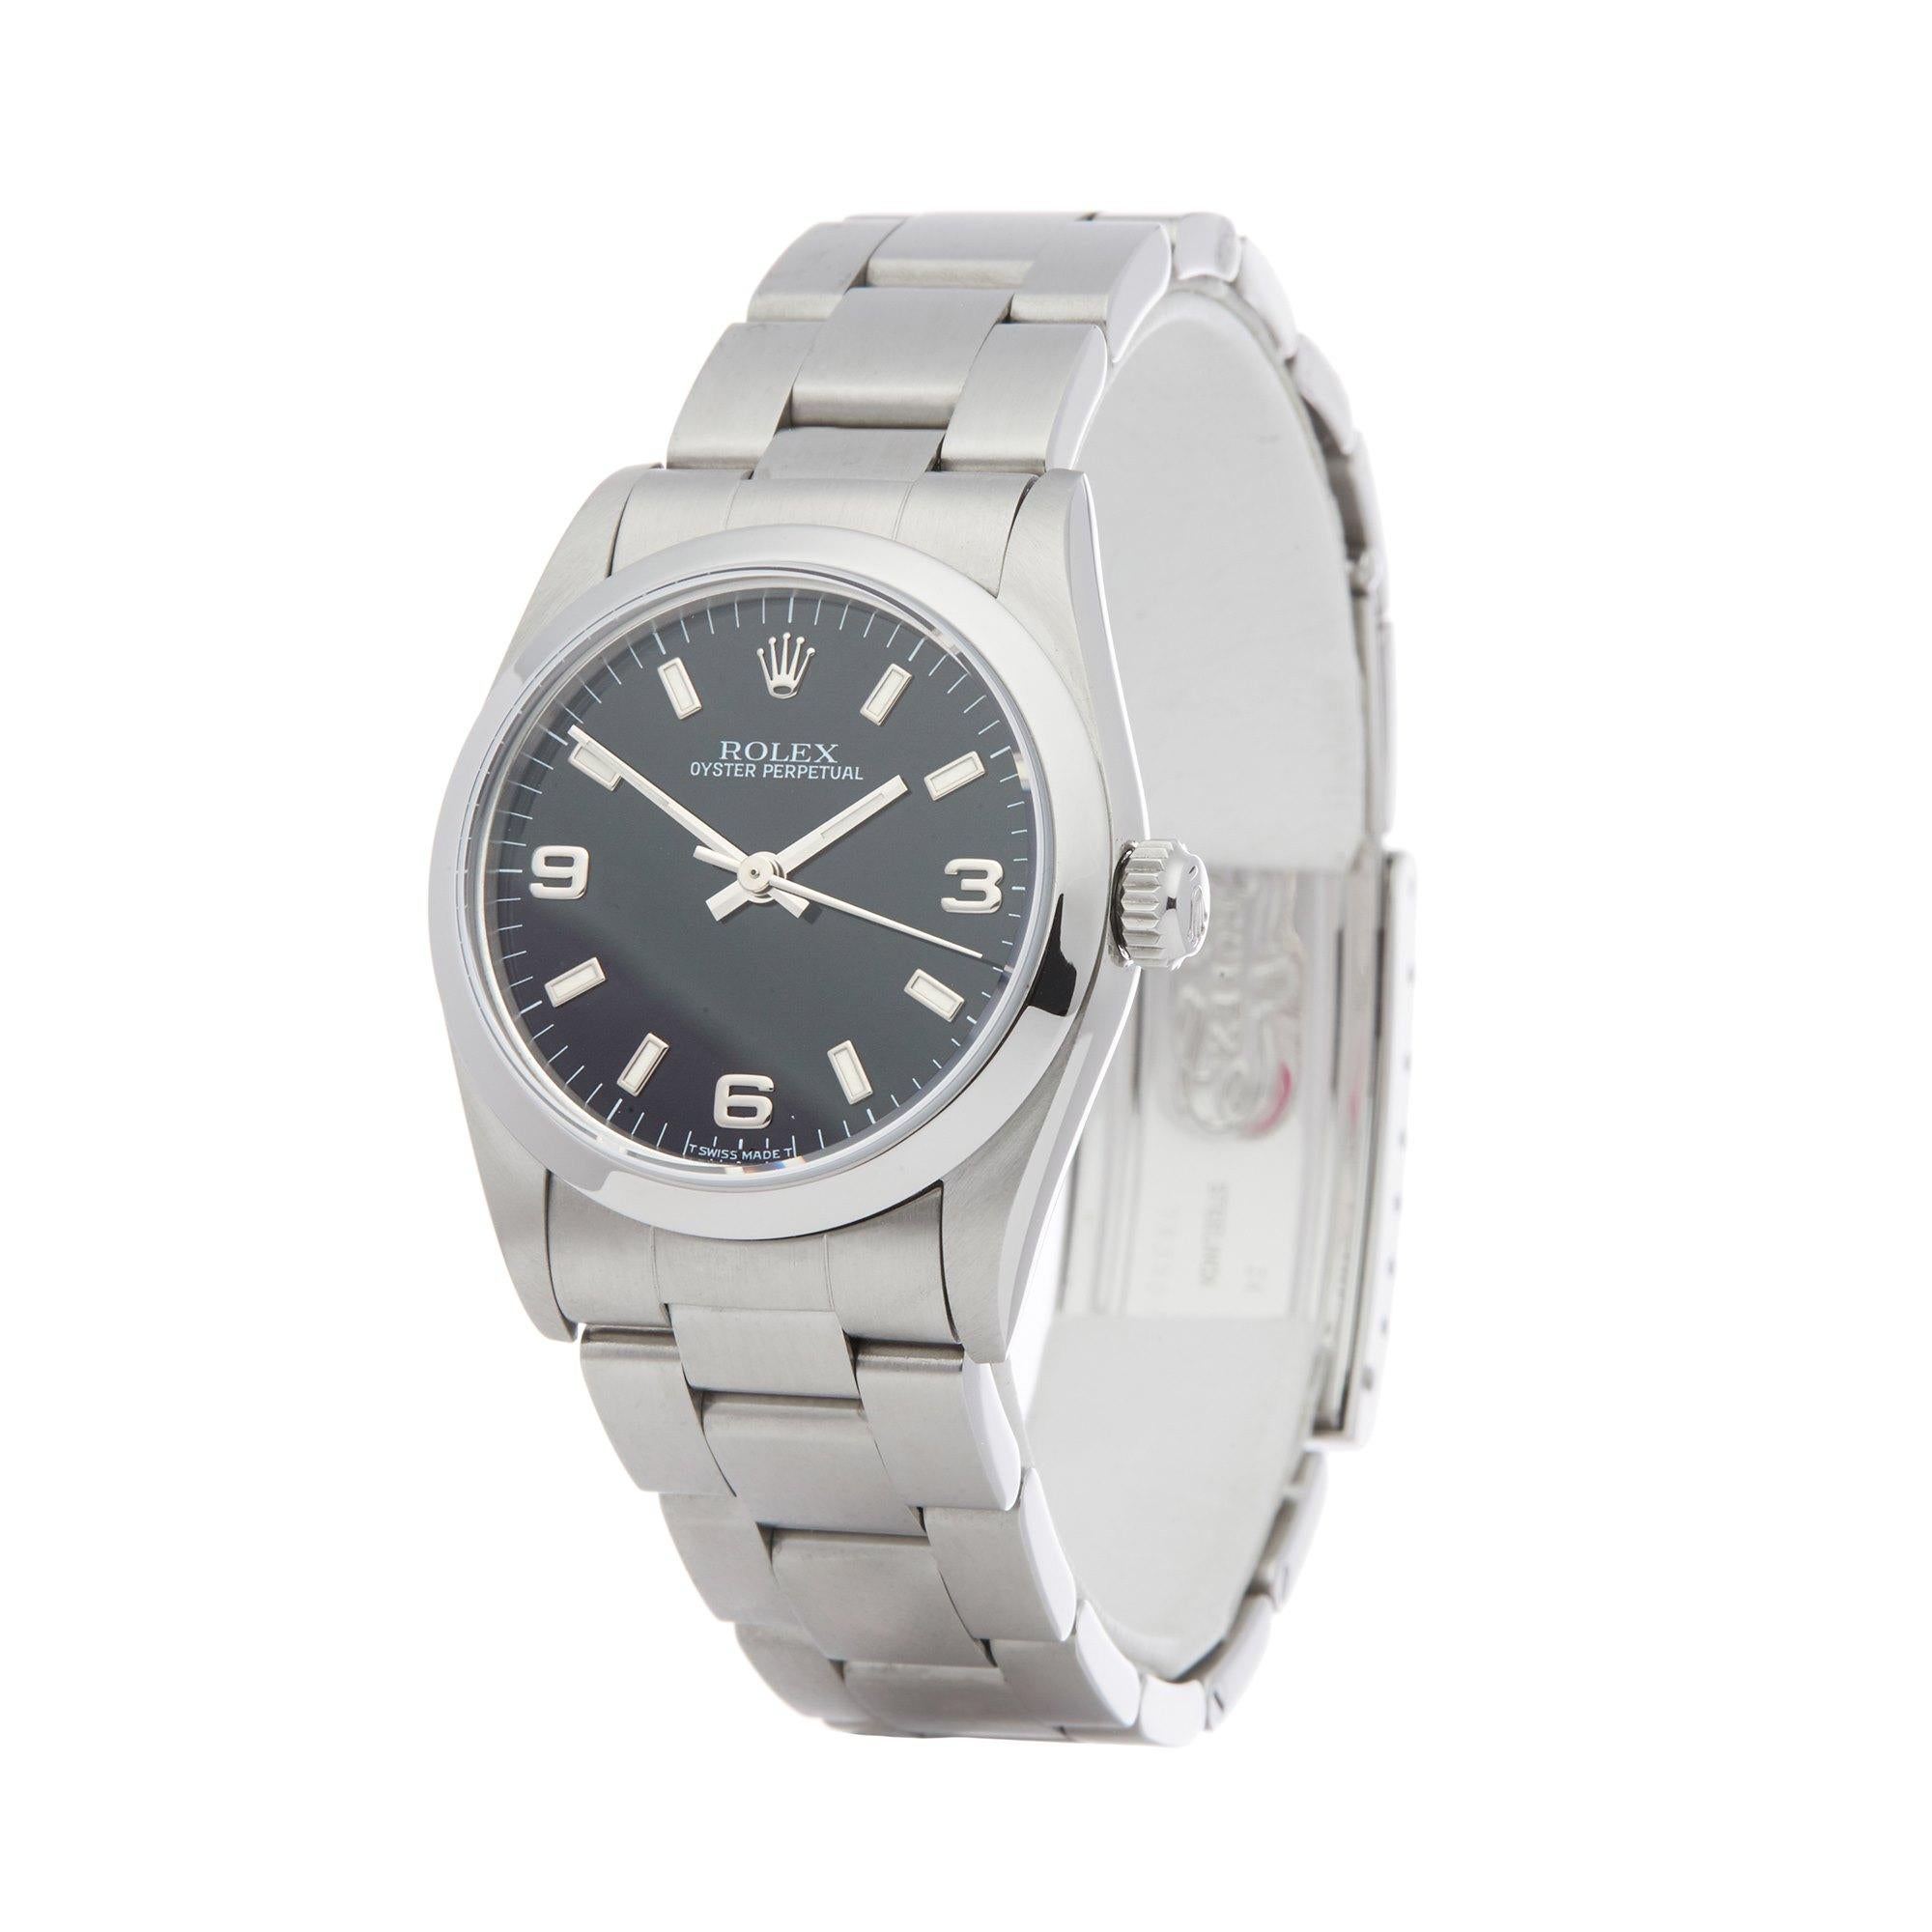 Xupes Reference: W007605
Manufacturer: Rolex
Model: Oyster Perpetual
Model Variant: 31
Model Number: 67480 
Age: 20-07-1997
Gender: Ladies
Complete With: Rolex Box, Guarantee & Swing Tag
Dial: Black Baton
Glass: Sapphire Crystal
Case Size: 31mm
Case